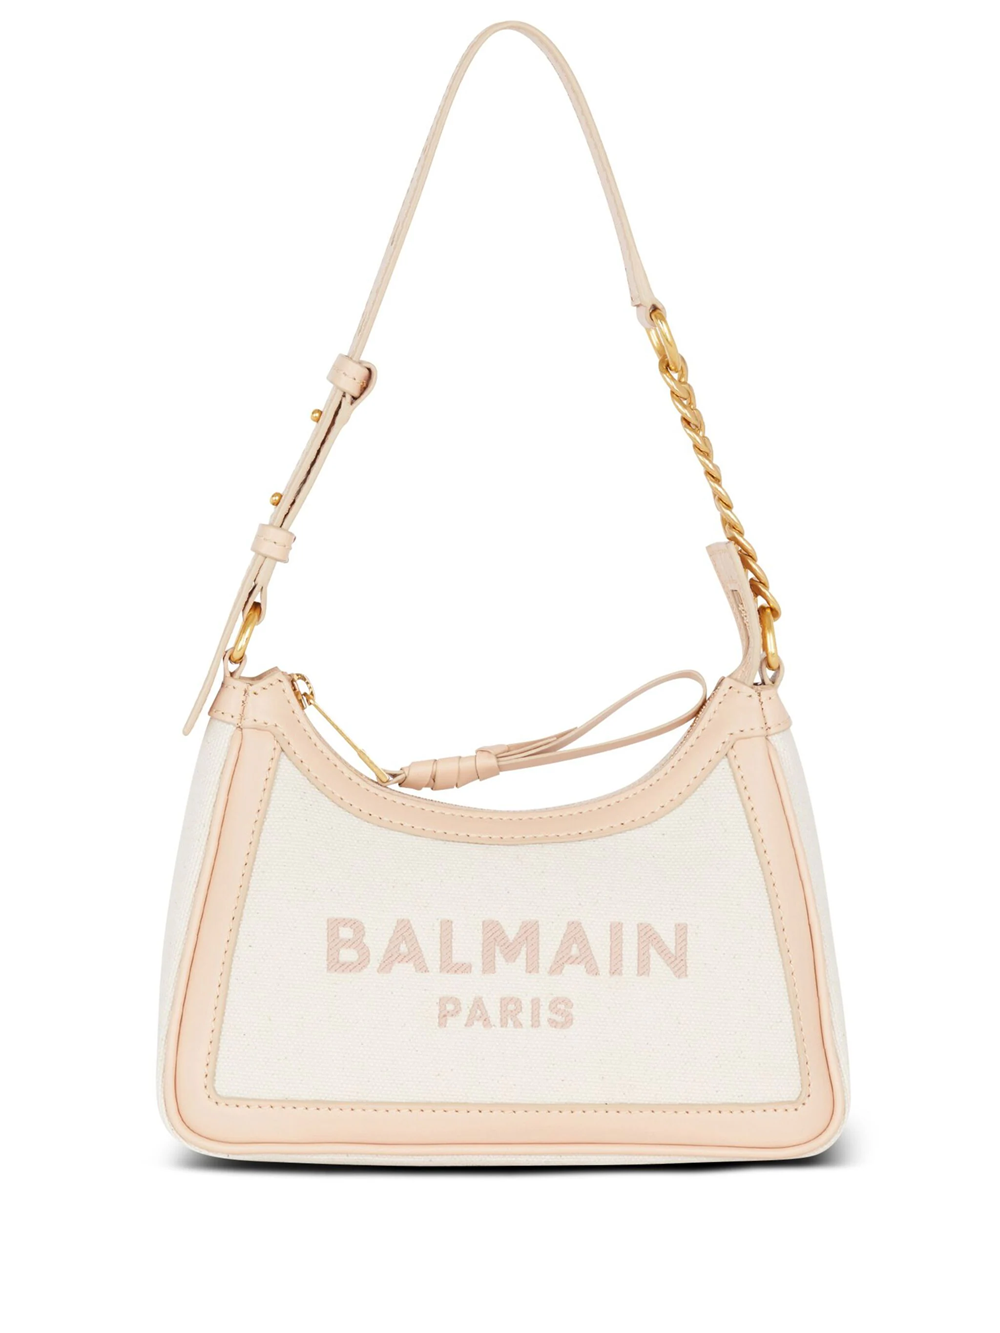 Balmain B-army Tote Bag With Embroidery In Nude & Neutrals